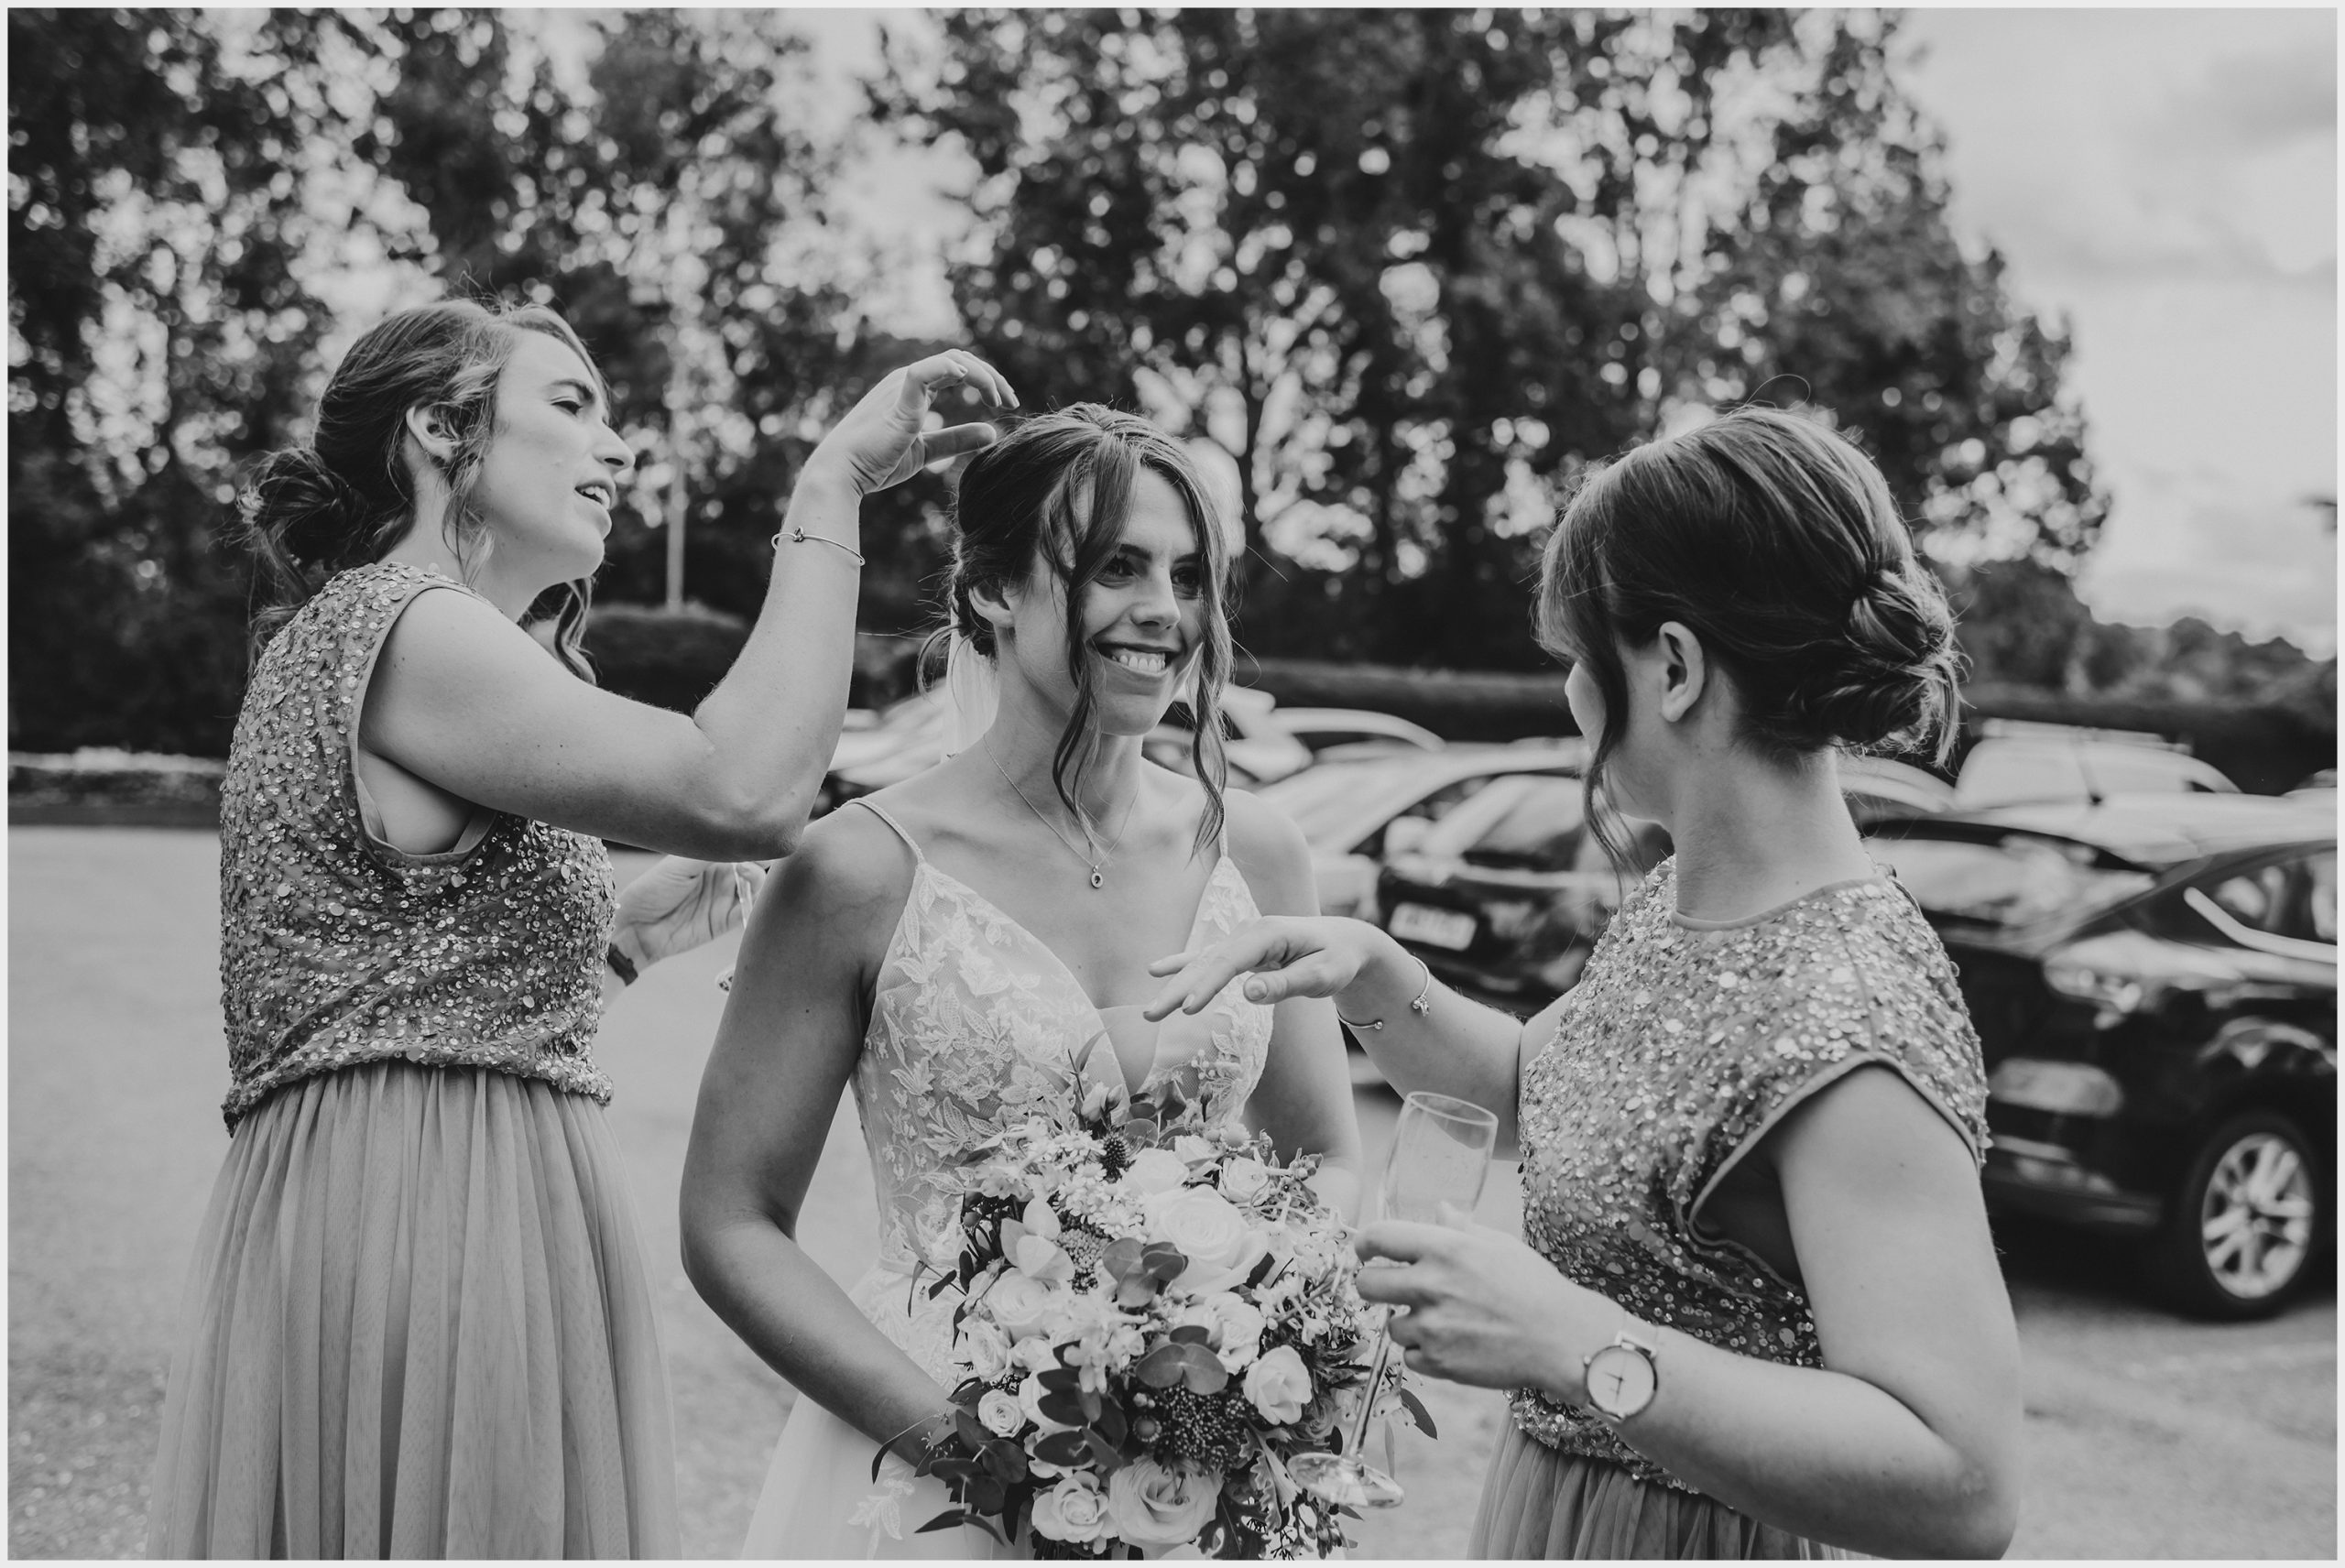 A bride with her head thrown back laughs as her bridesmaids remove confetti from her hair.  Image captured by Grosvenor Pulford Hotel and Spa wedding photographer Helena Jayne Photography